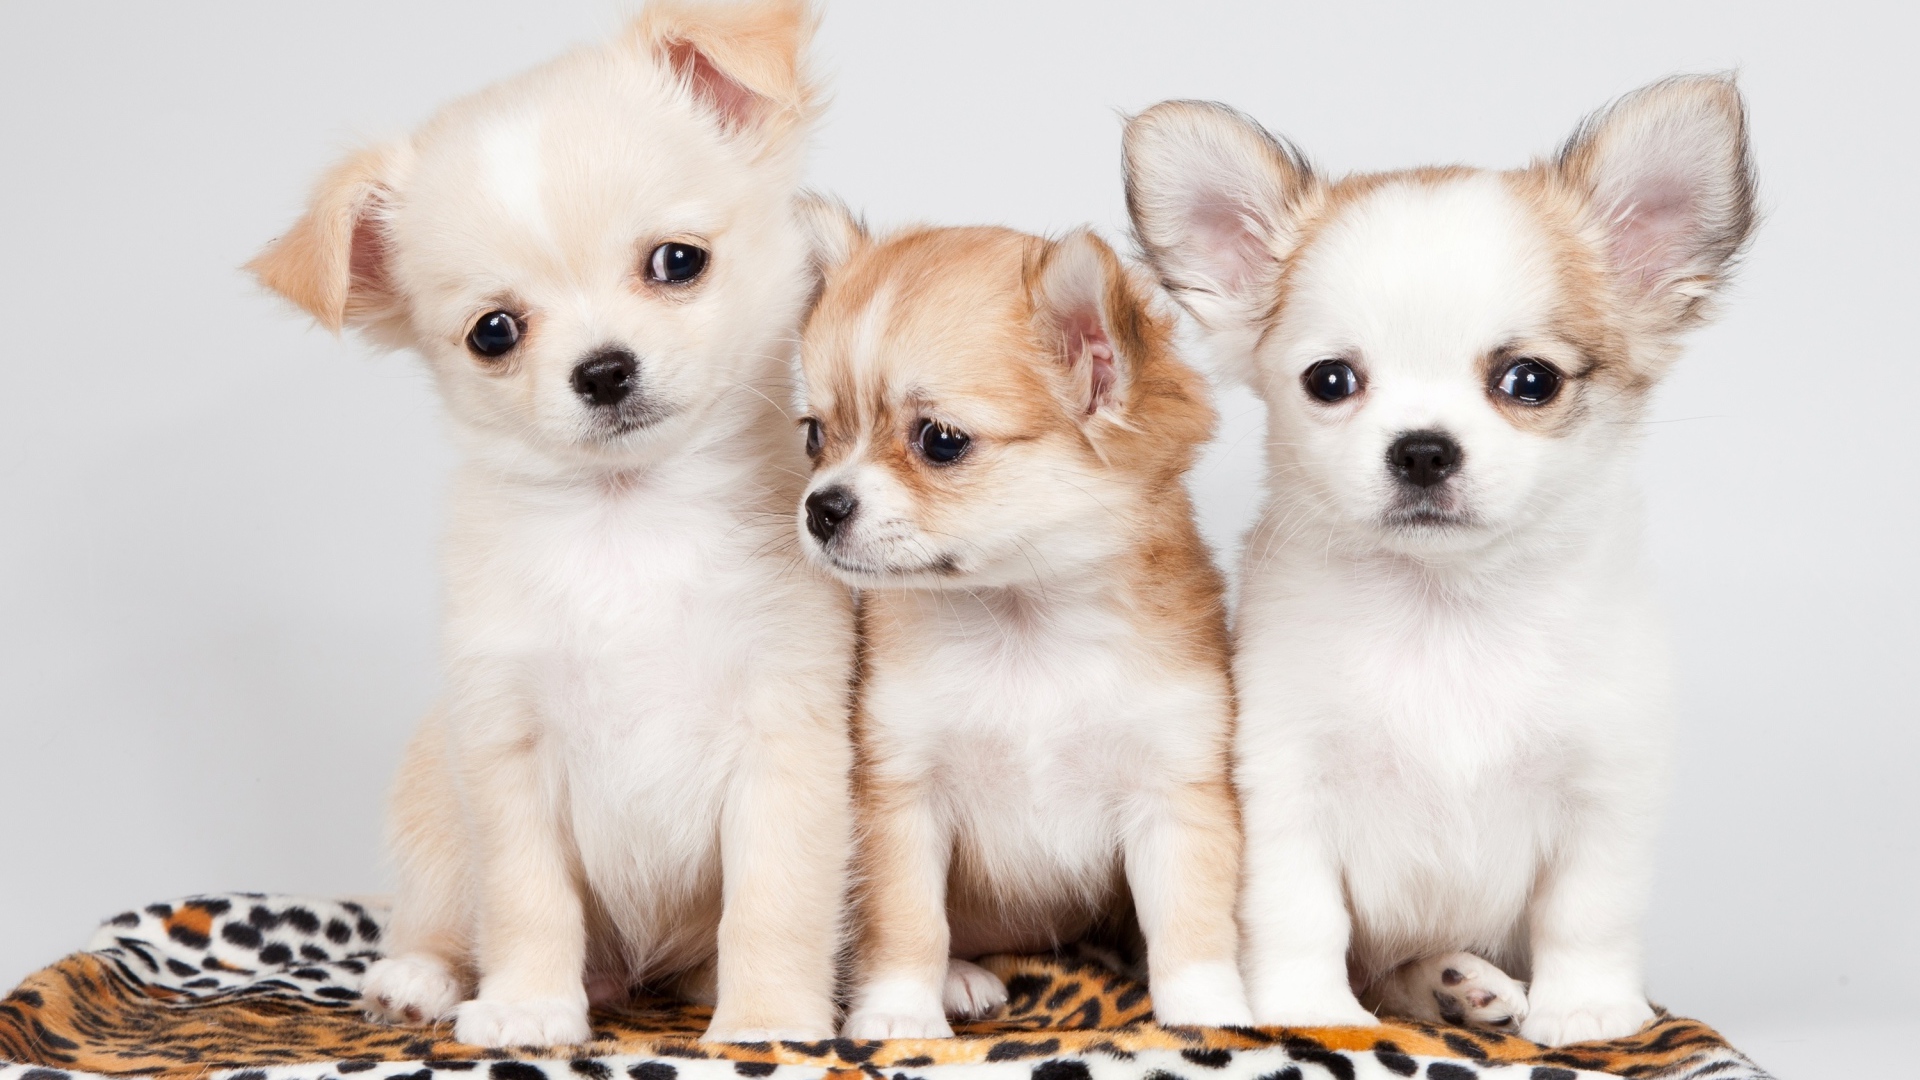 Three little funny chihuahua puppies Desktop wallpapers 1920x1080